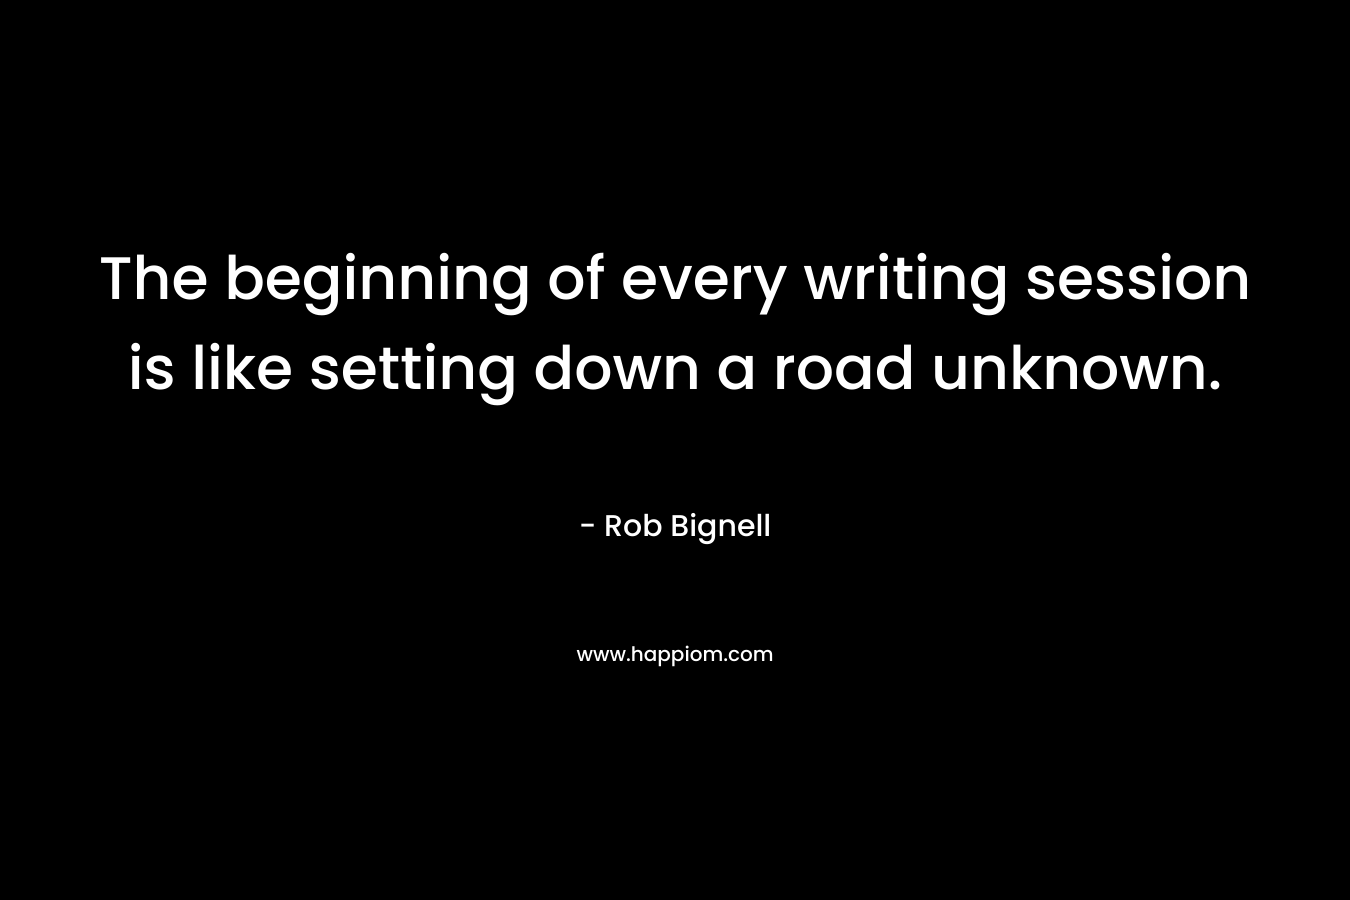 The beginning of every writing session is like setting down a road unknown. – Rob Bignell